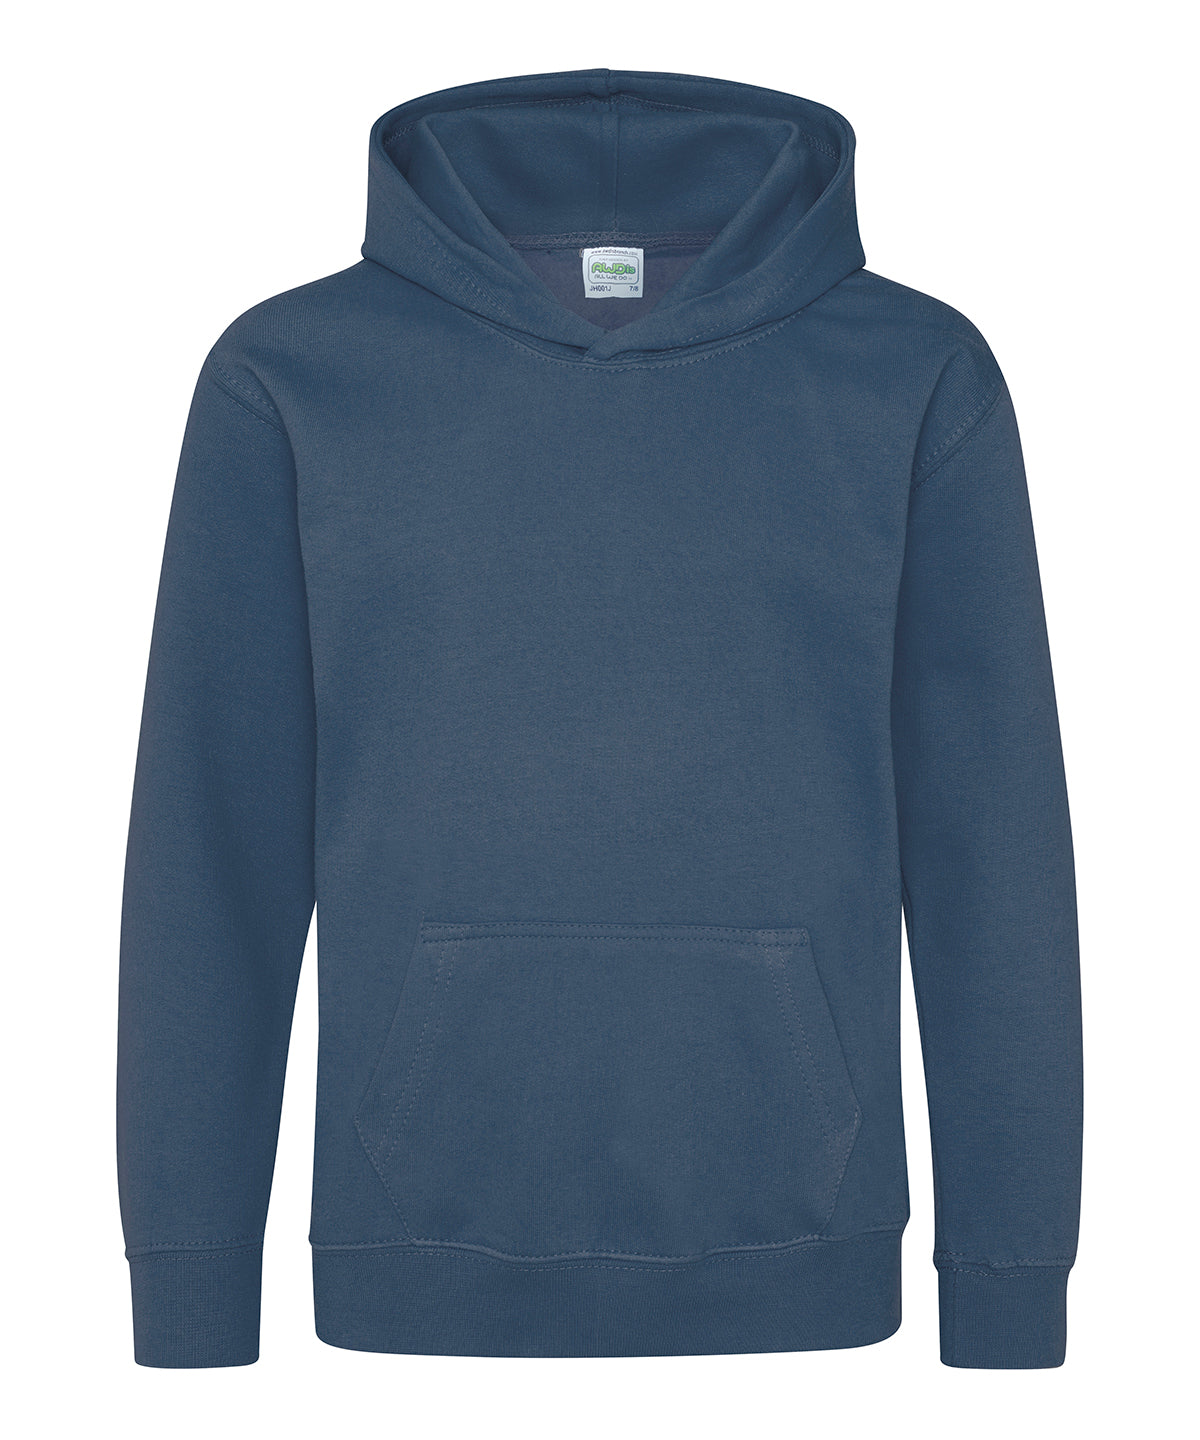 Hill West School Leavers Hoodies - Size Adult Small